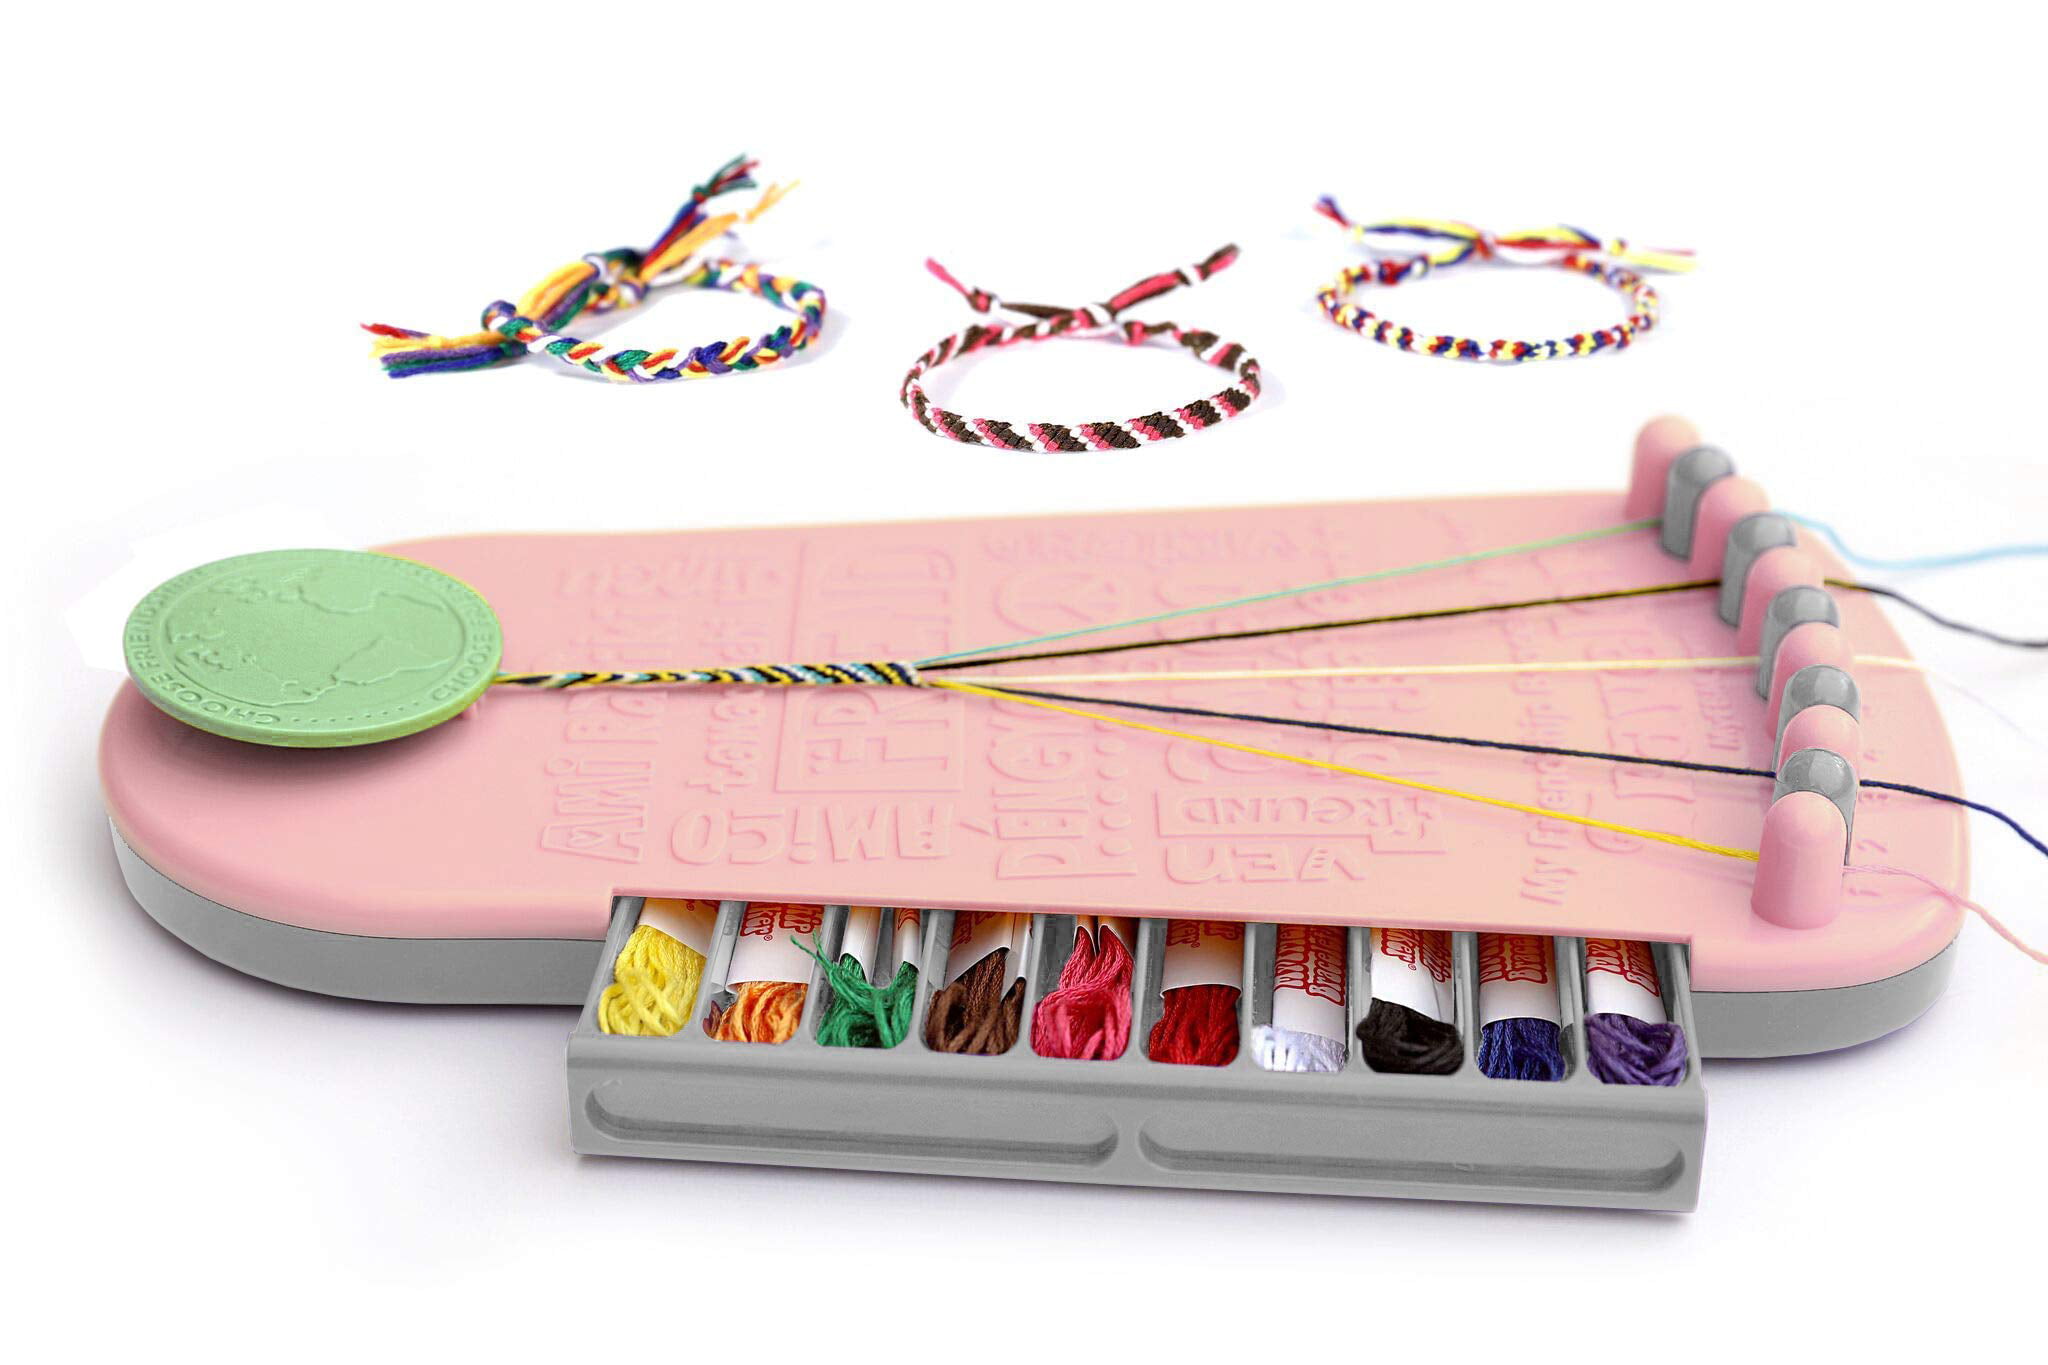 Choose Friendship, My Friendship Bracelet Maker (New and Improved), An American Original | 20 Pre-Cut Threads - Makes Up to 8 Bracelets | Craft Kit